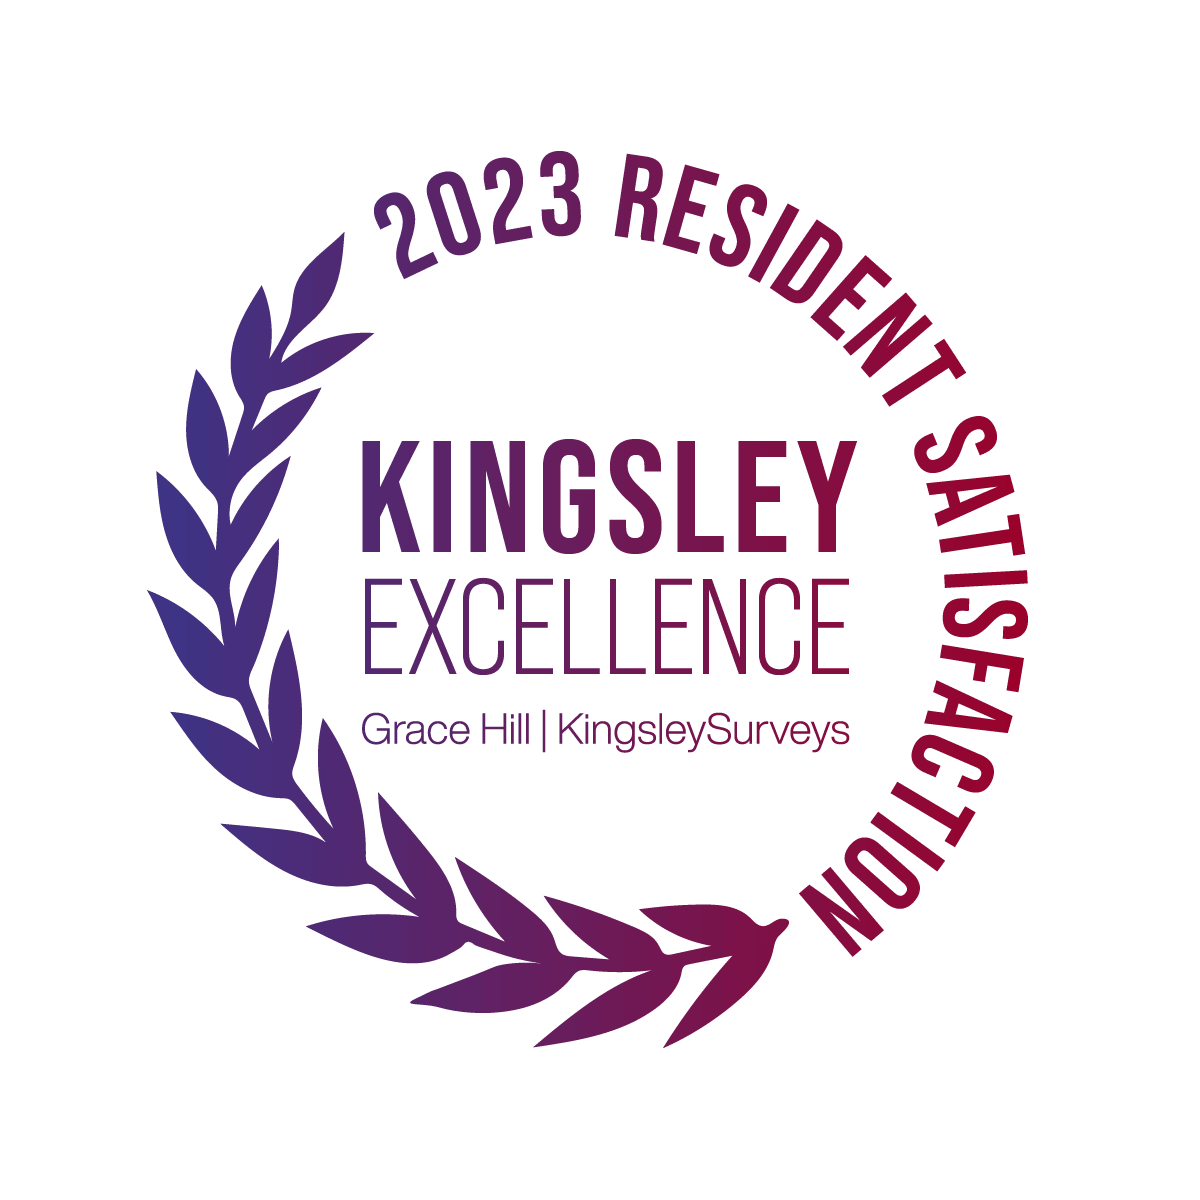 Kingsley award of excellence graphic